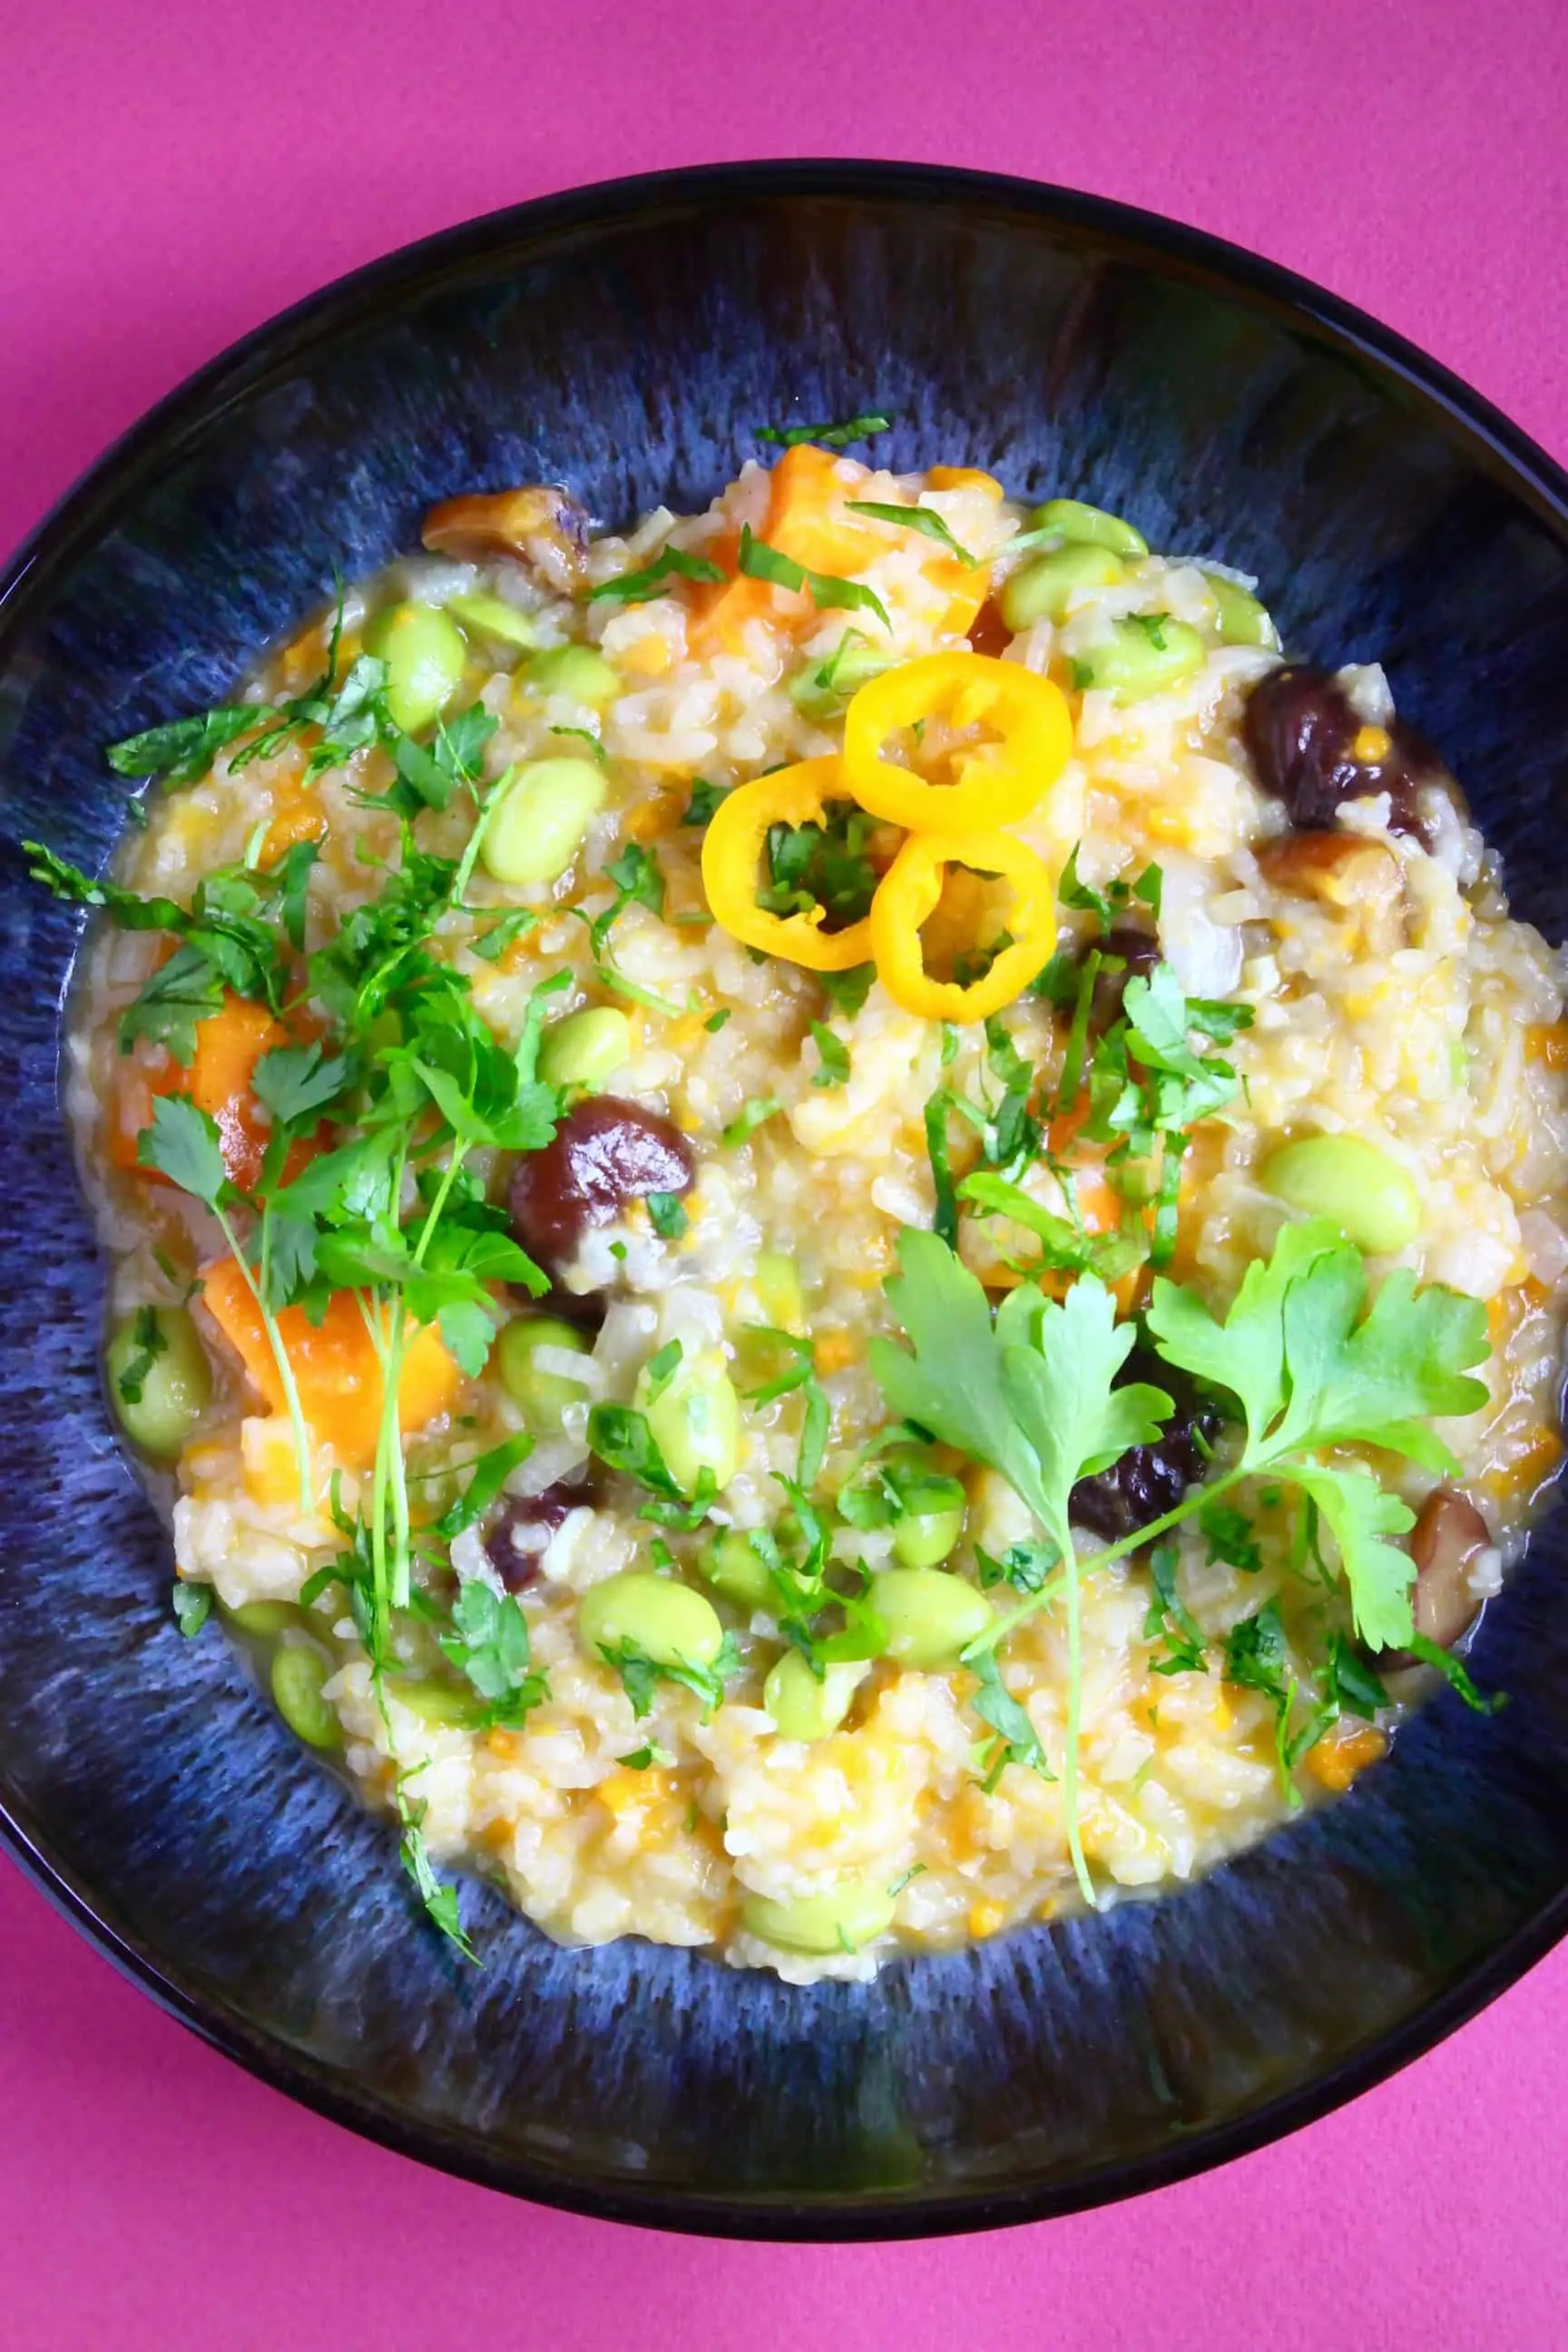 Orange risotto with brown chestnuts decorated with green herbs in a dark blue bowl against a bright pink background